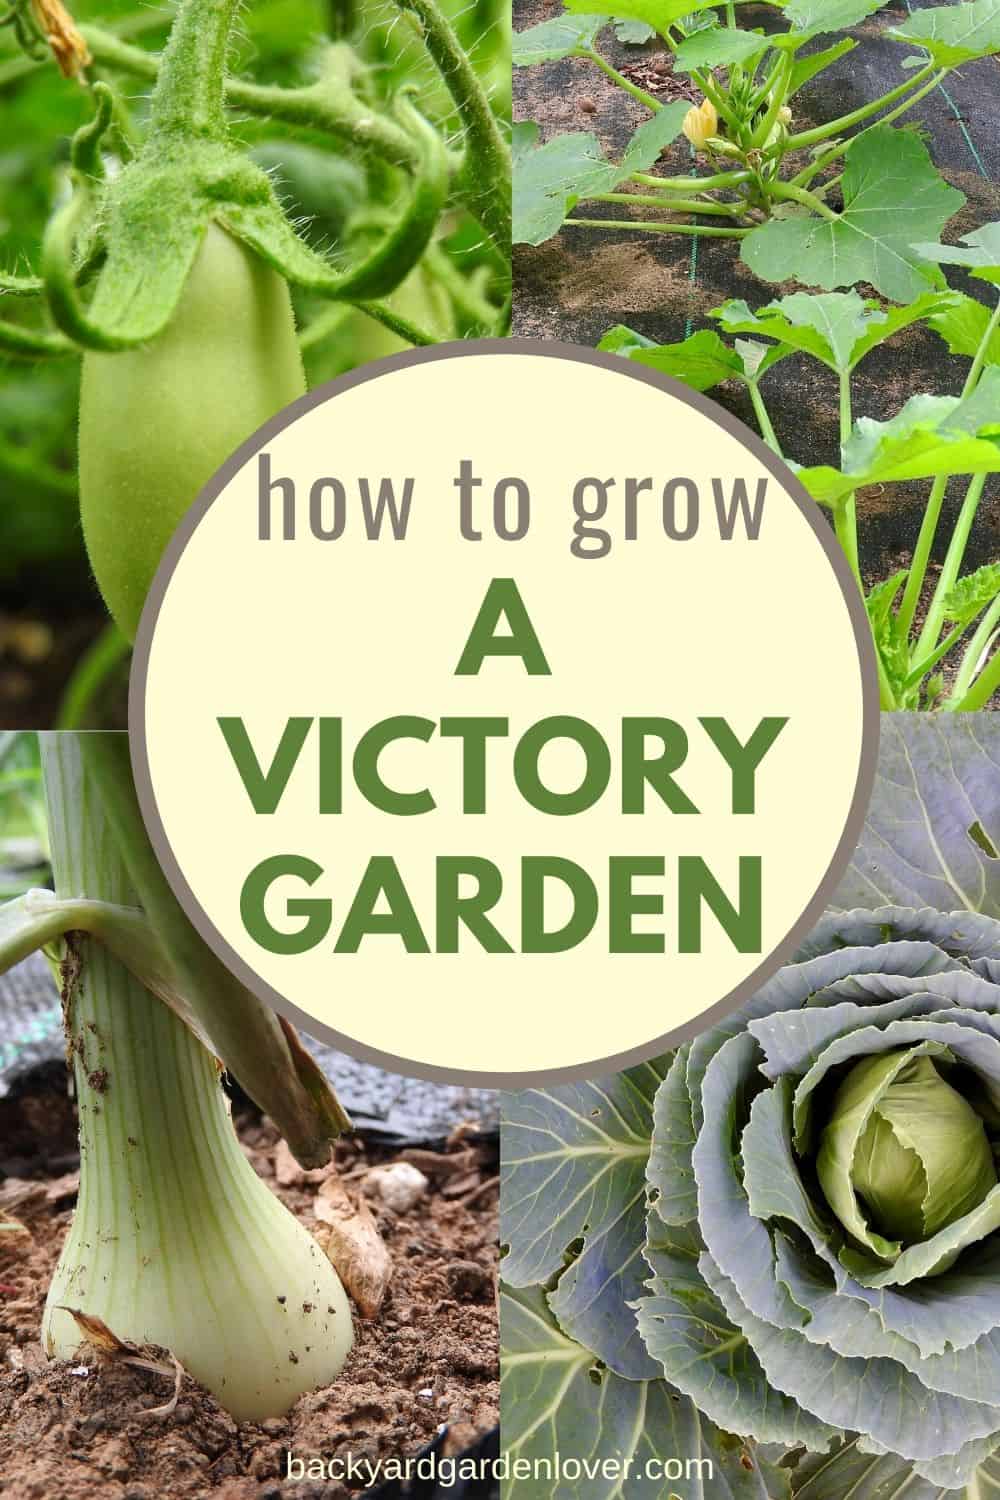 How to grow a victory garden